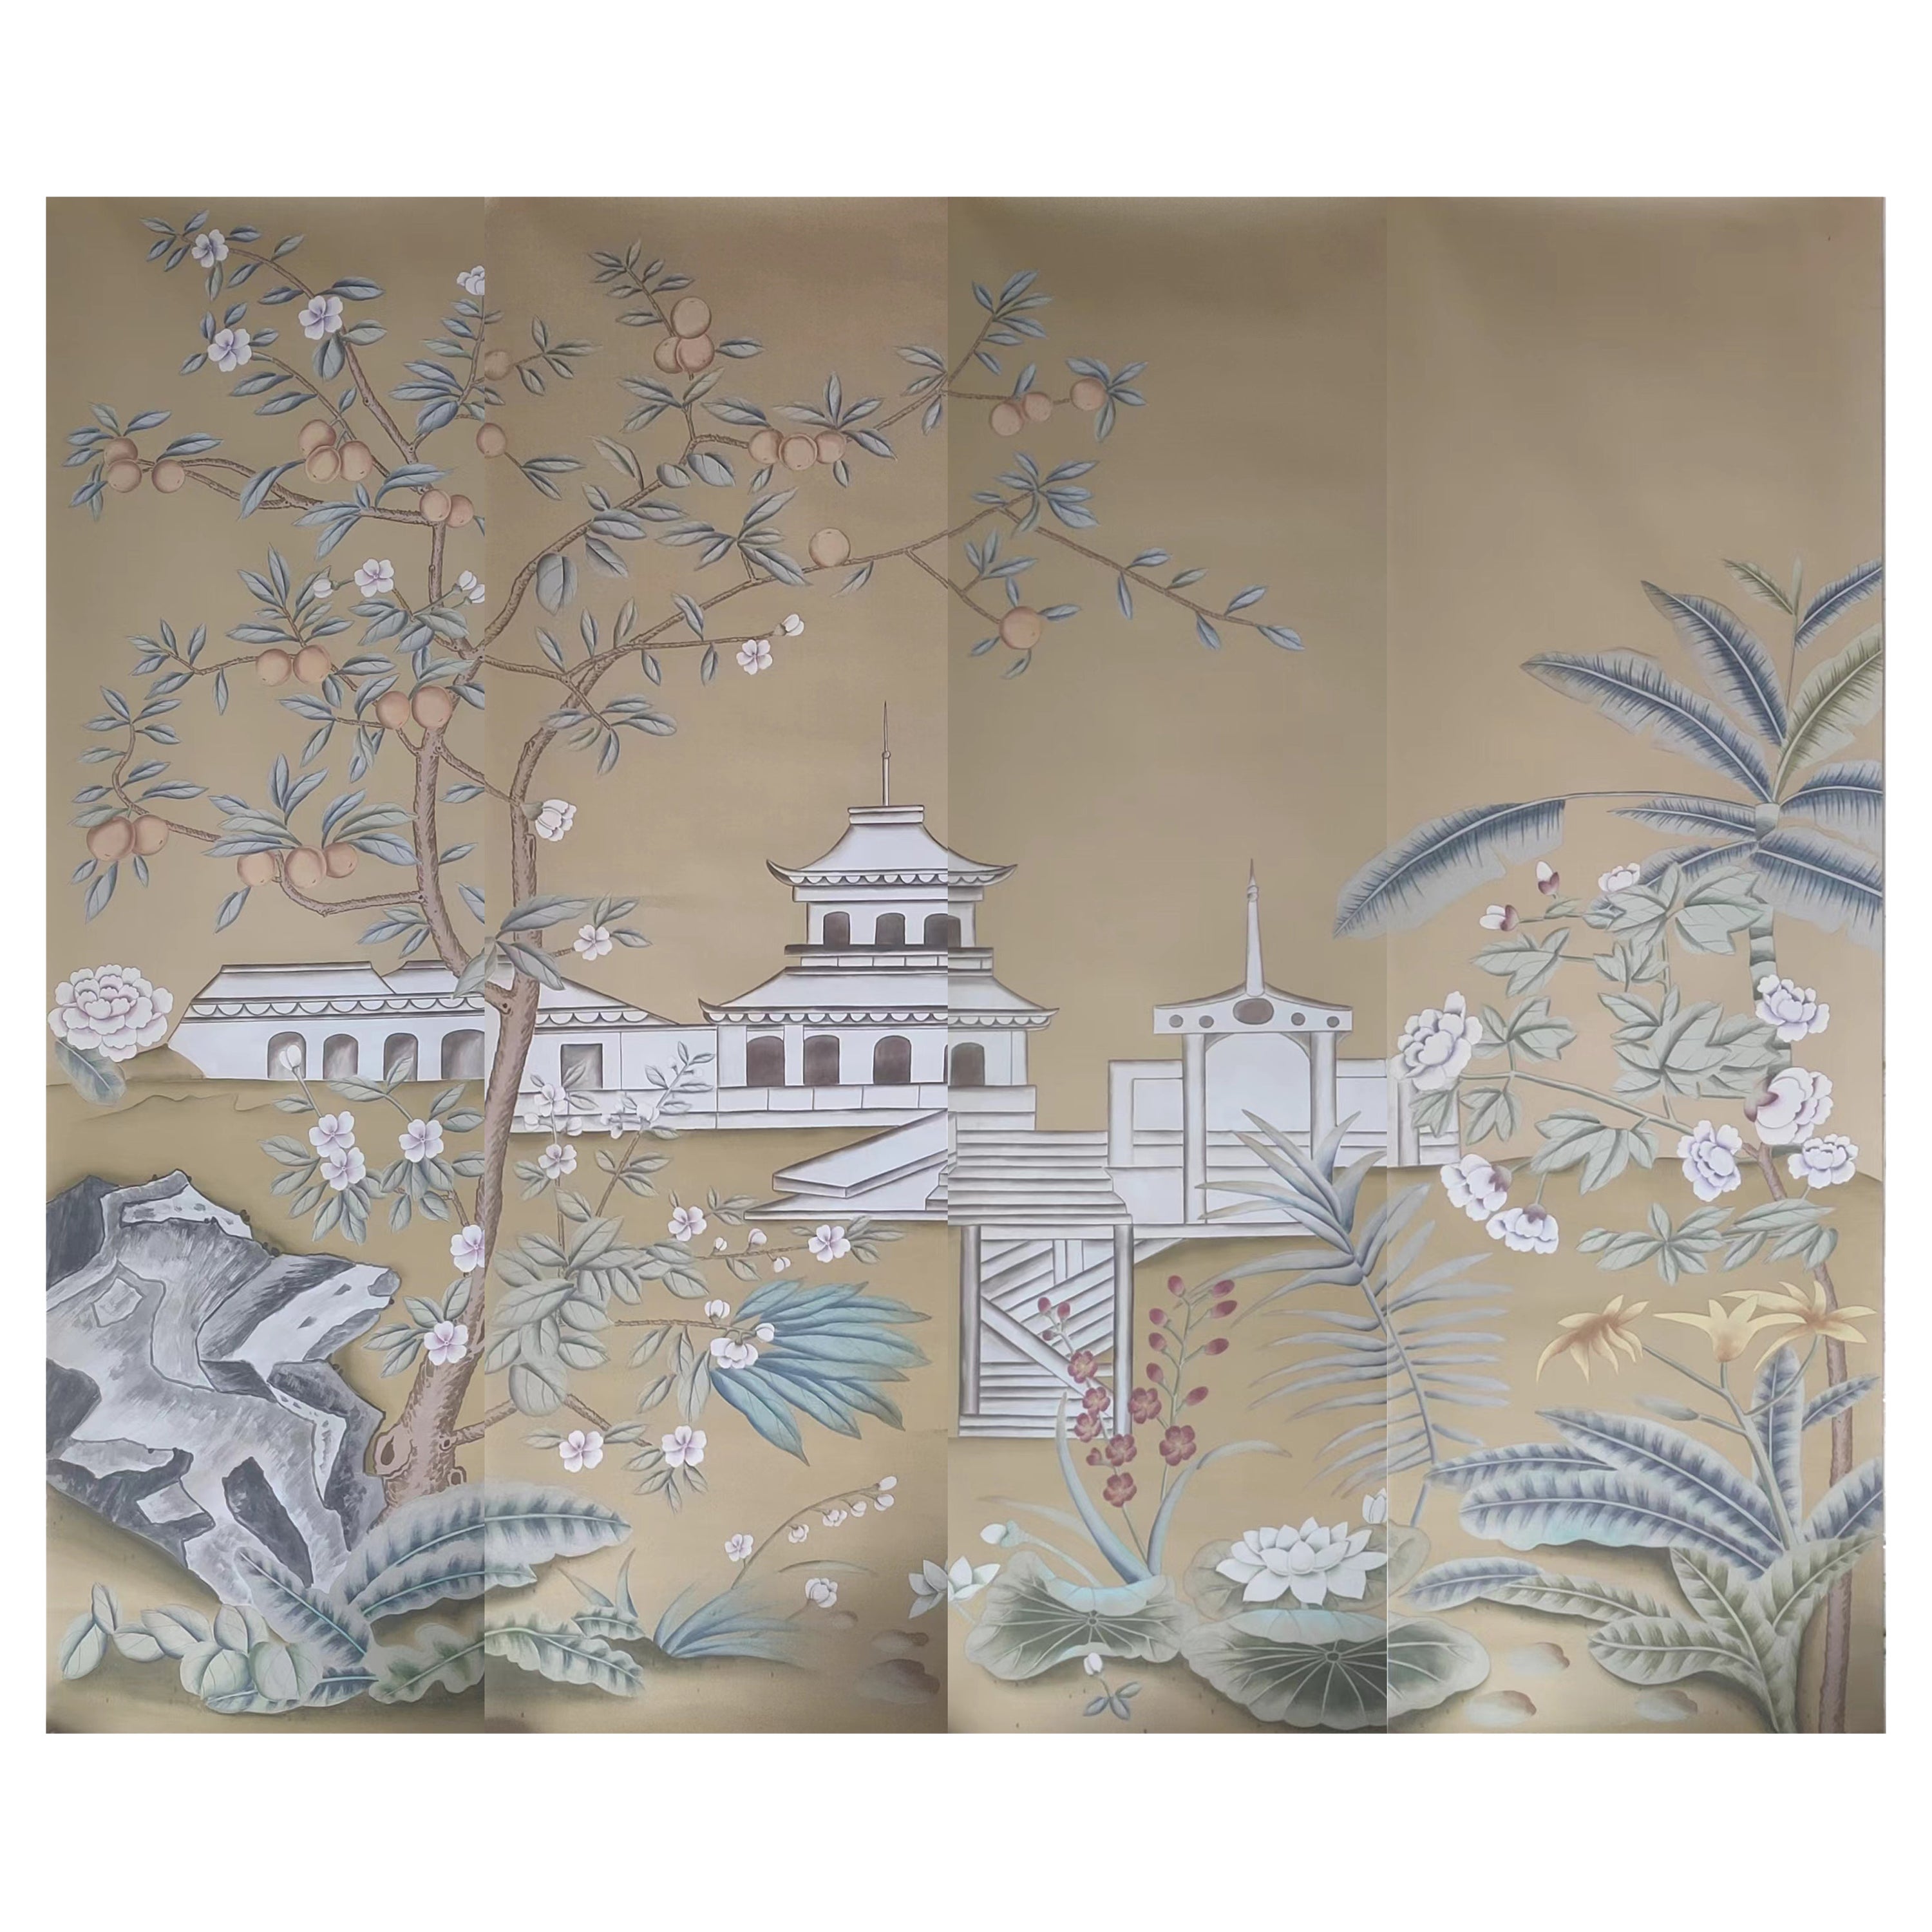 Chinoiserie Murals Hand Painted Wallpapers on Silk Panel, 4 Panels